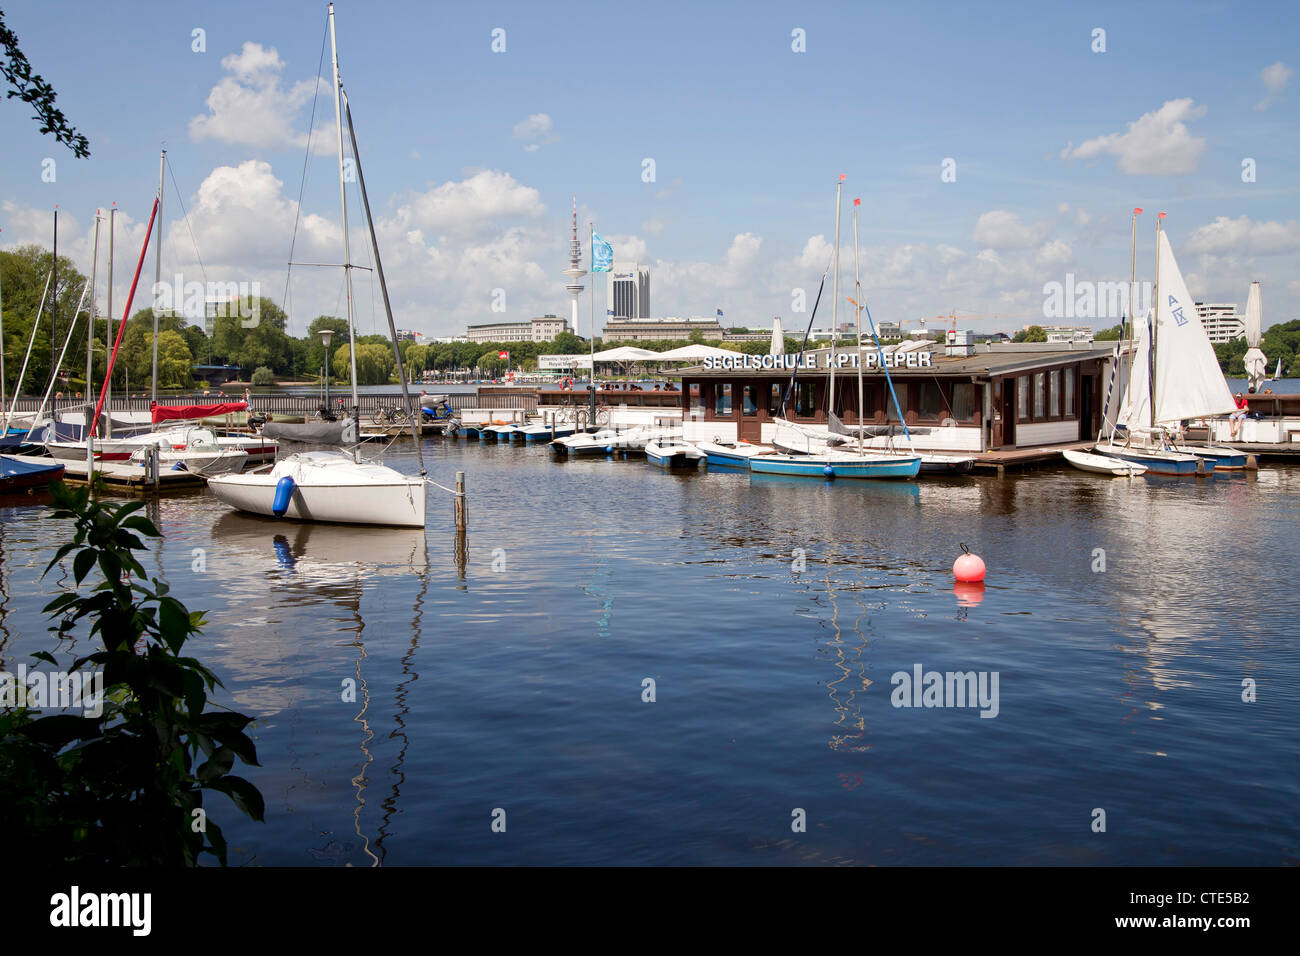 sailing school Captain Pieper at the lake Außenalster (outer Alster), Free and Hanseatic City of Hamburg, Germany Stock Photo